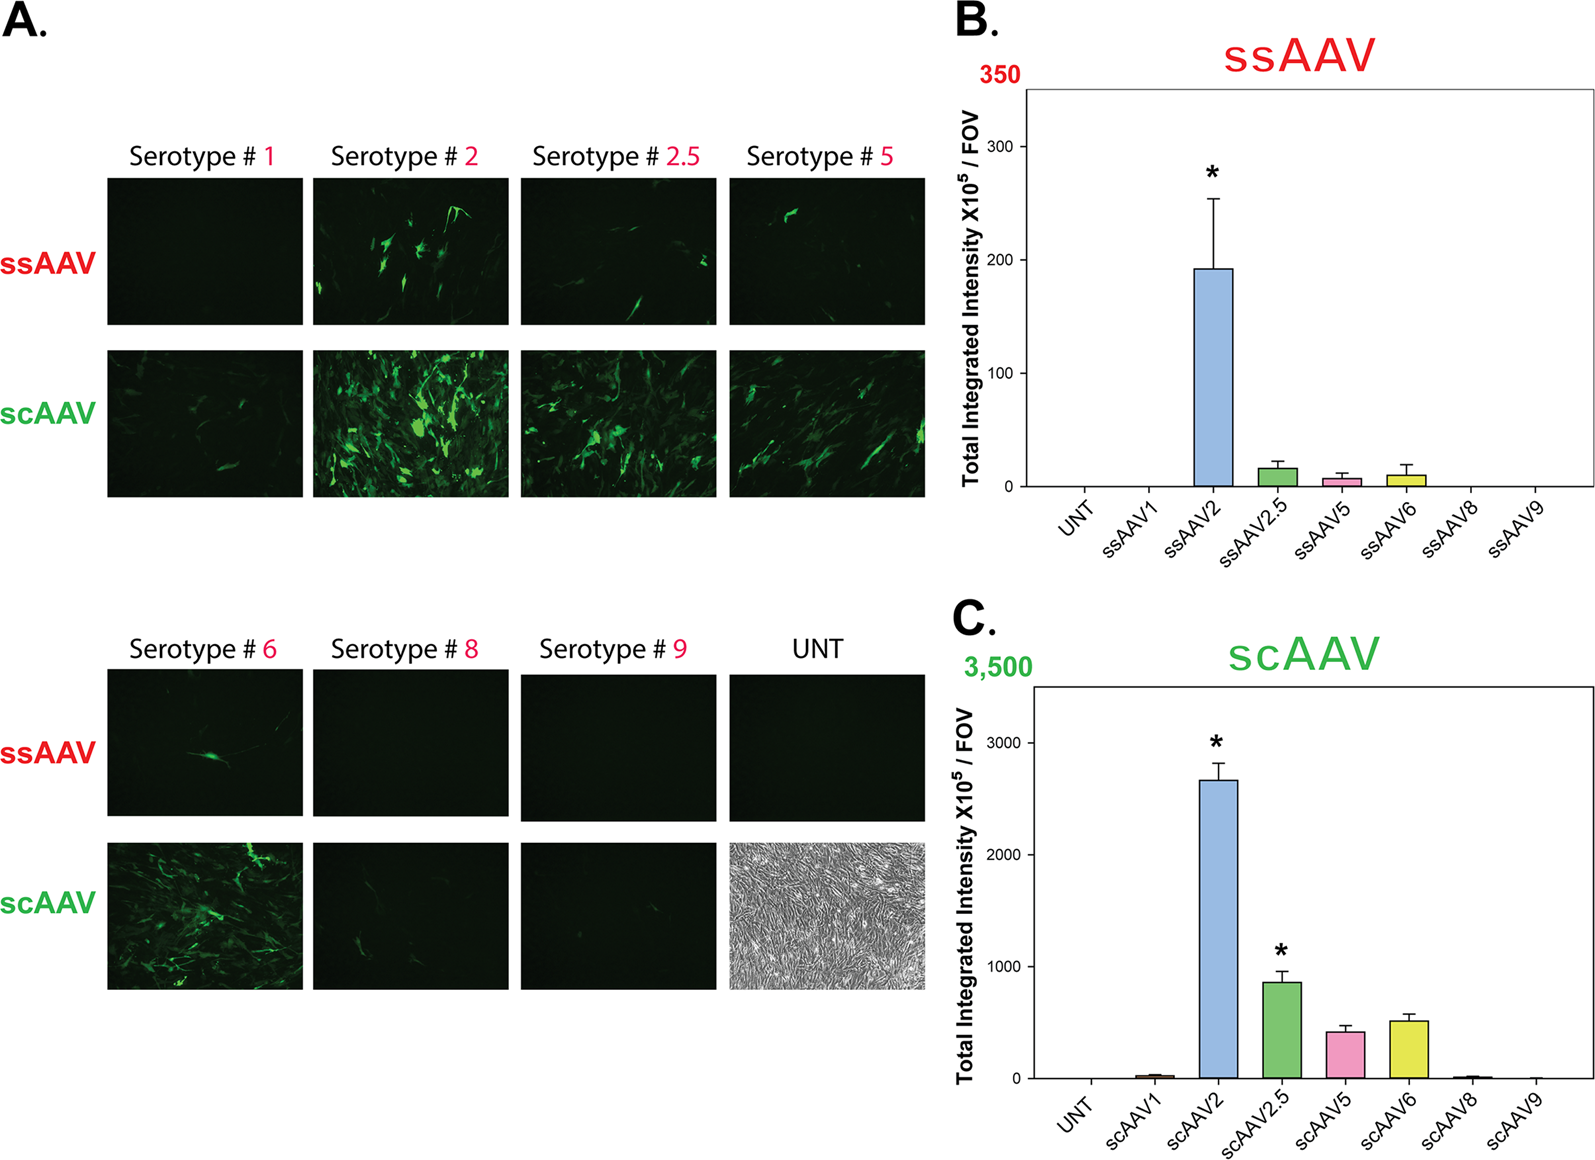 Spoedig veel plezier Corrupt Transduction optimization of AAV vectors for human gene therapy of glaucoma  and their reversed cell entry characteristics | Gene Therapy